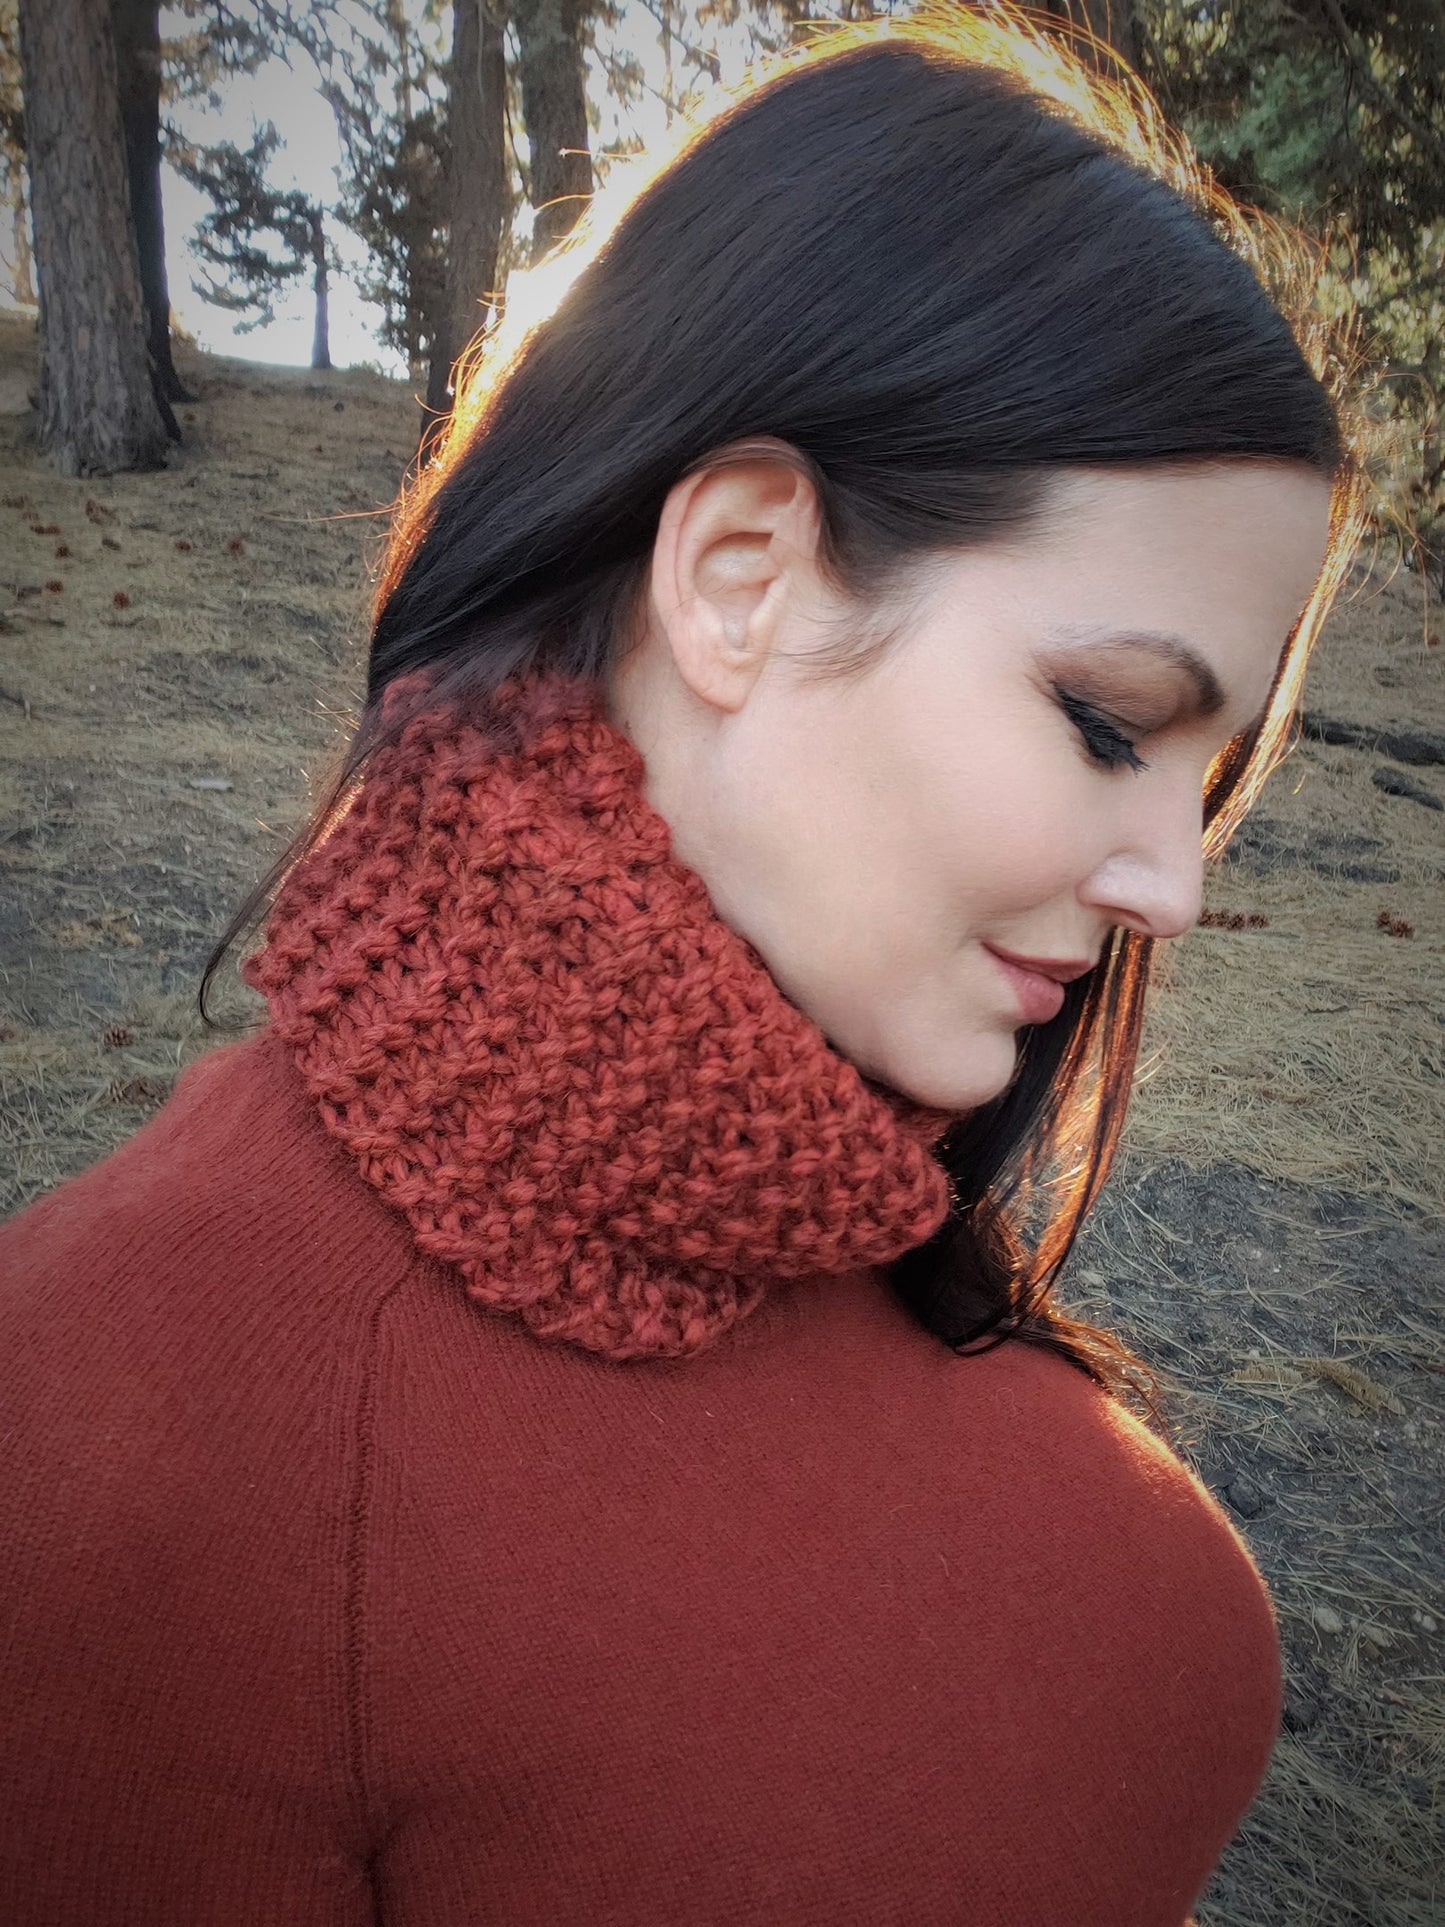 The "Mahogany" Brick Red Hand Knitted Infinity Scarf or Cowl